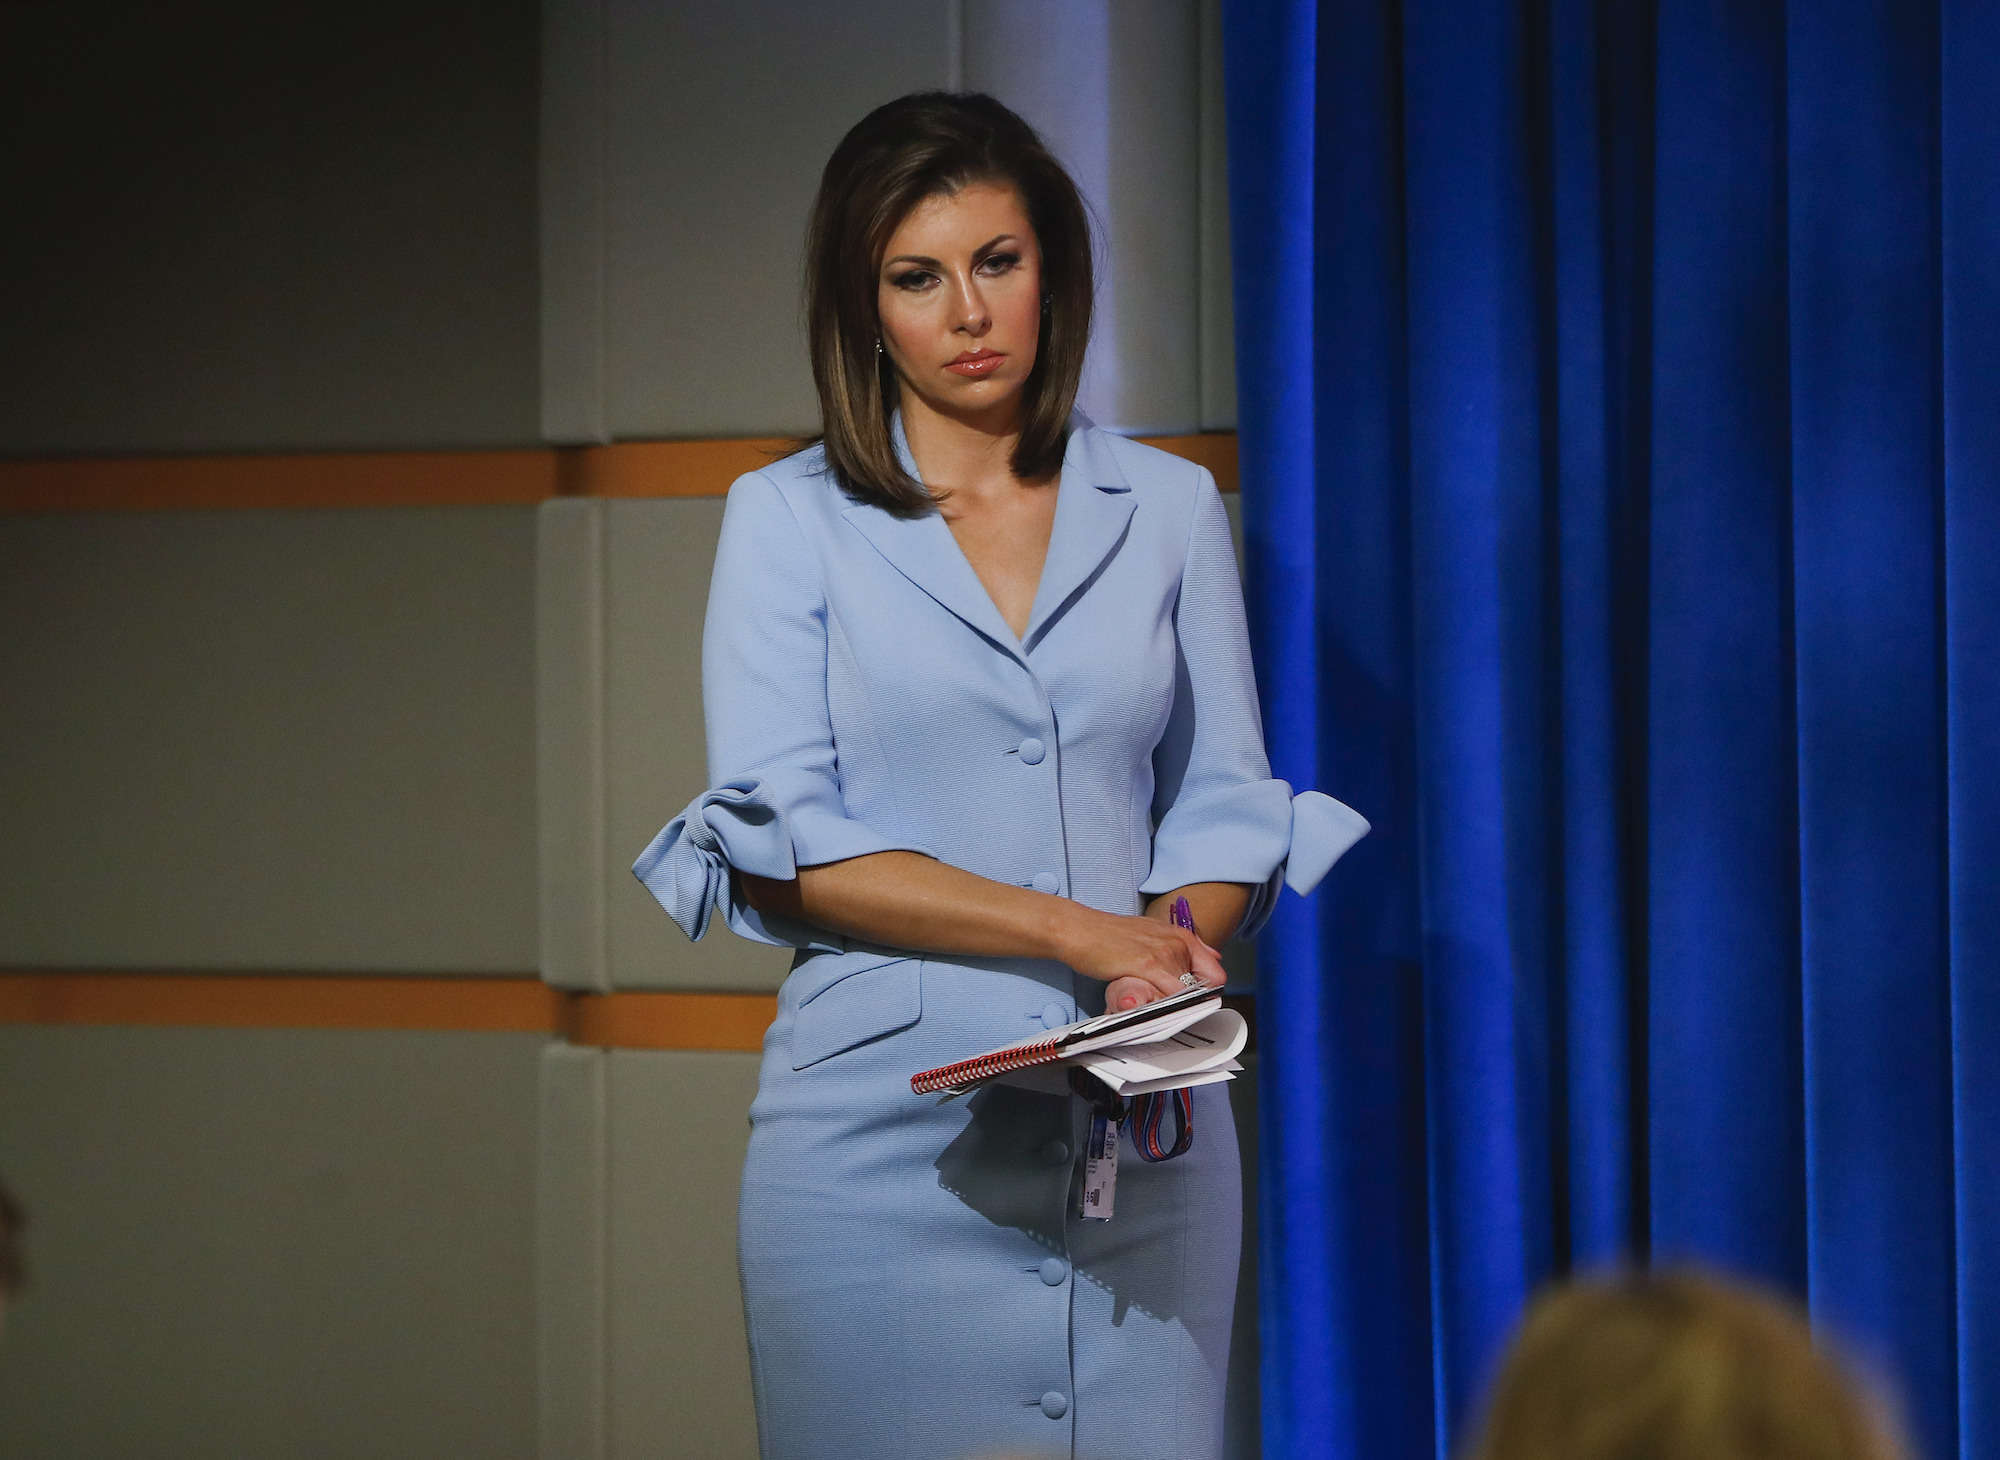 Morgan Ortagus Who Appeared On Fox As A Contributor After Working On Counterterrorism And 